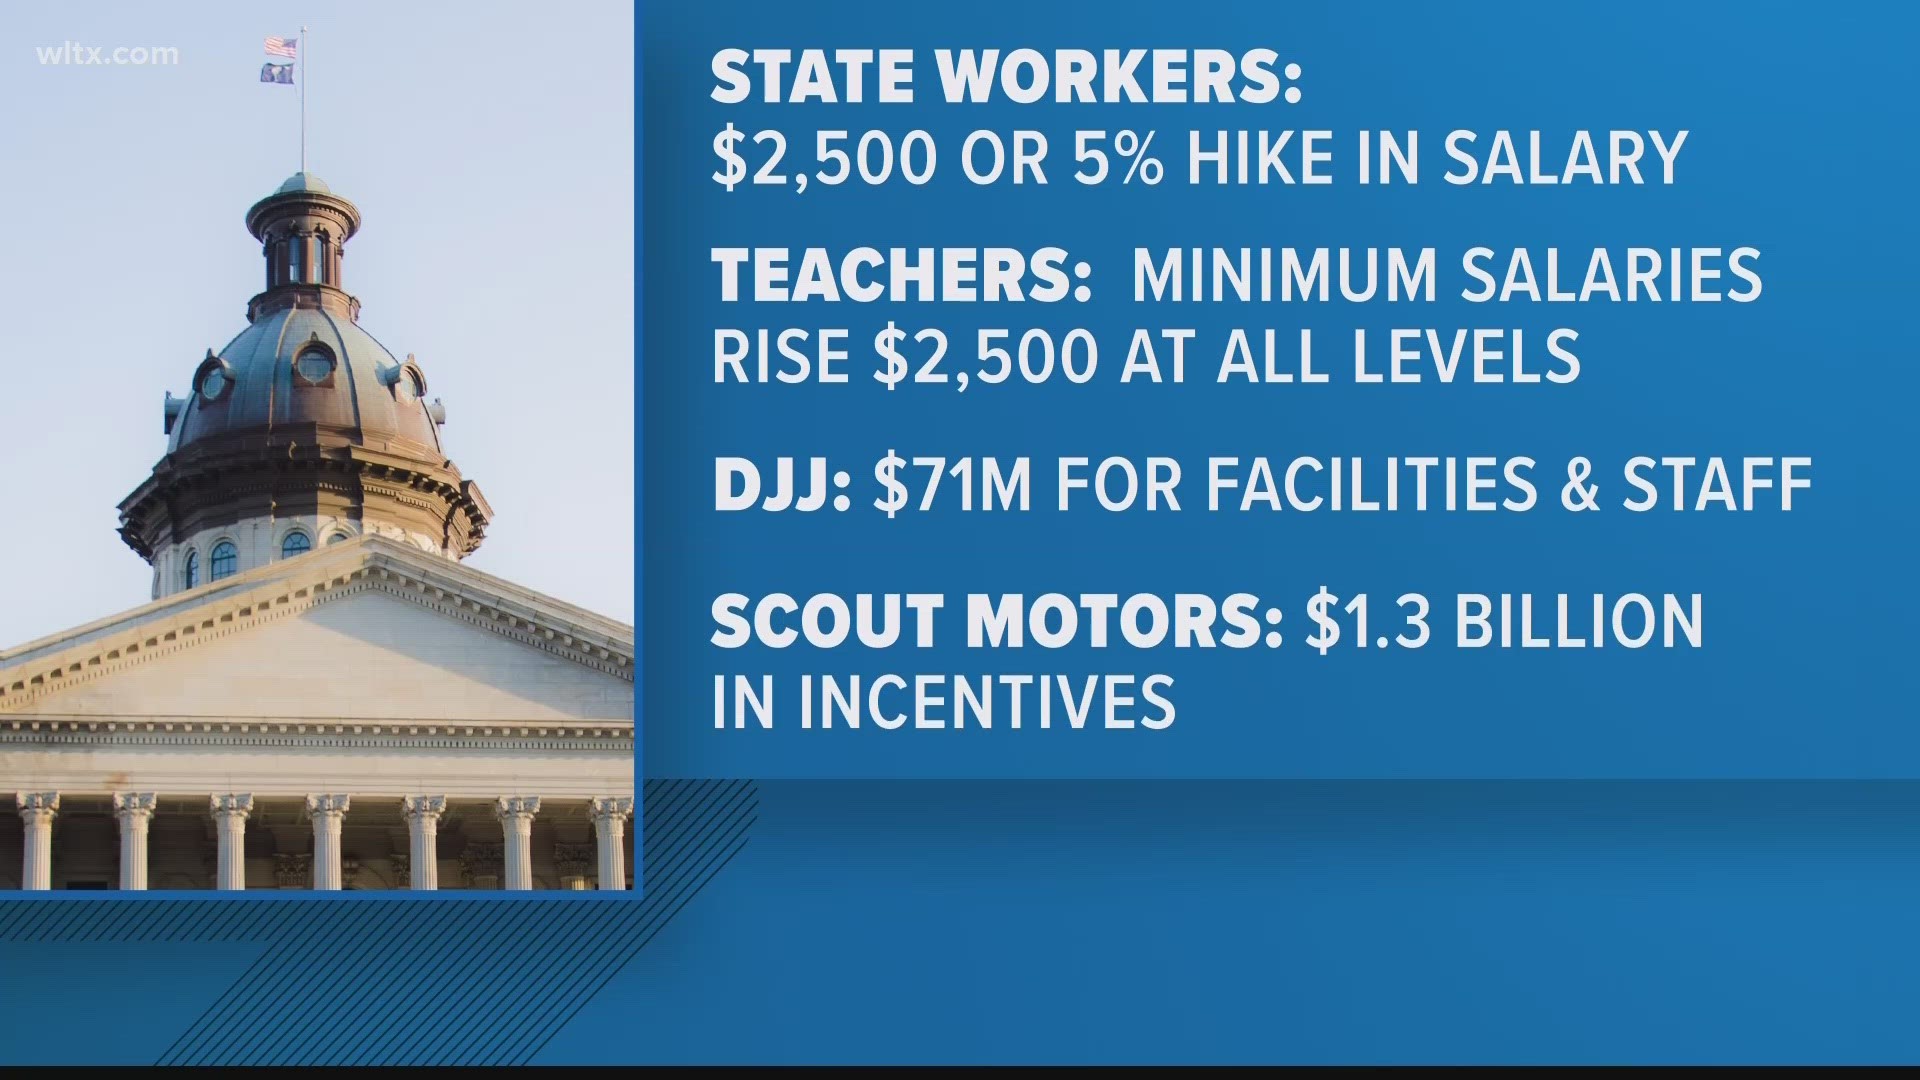 Pay raises for teachers and state employees, along with a new veterinarian school and millions for road projects are included.